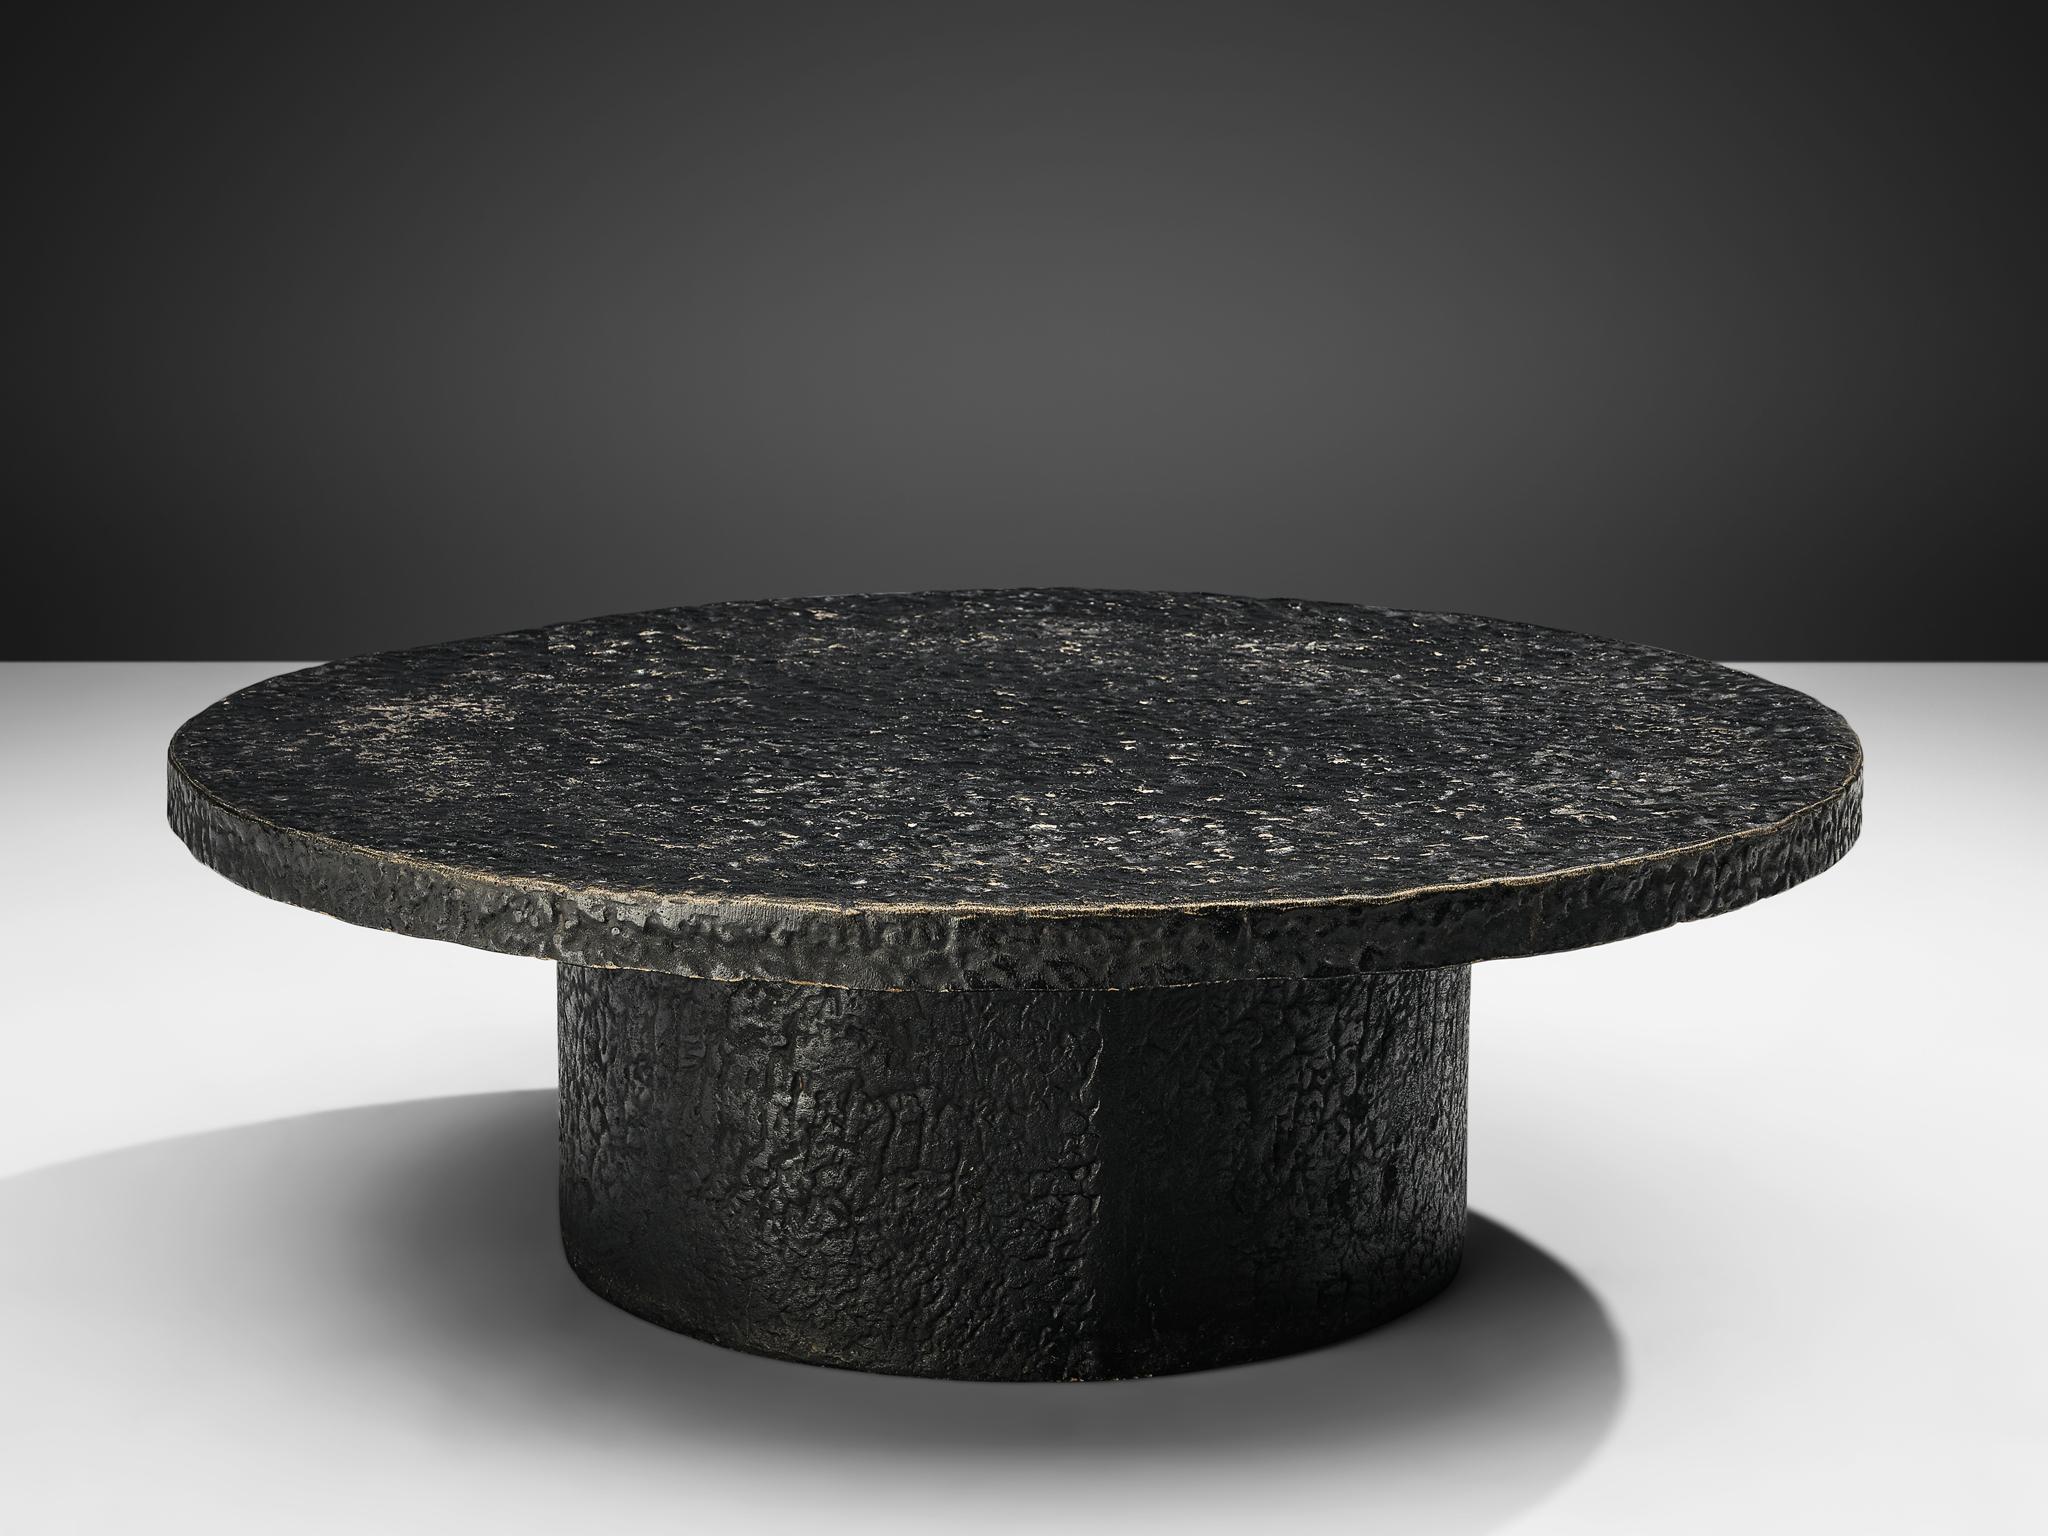 Cocktail table, resin, Northern-Europe, 1970s.

This deep black to brown robust coffee or cocktail table is from the 1970s. The thick round top is supported by a similar but smaller round column. This low table is made out of resin which resembles